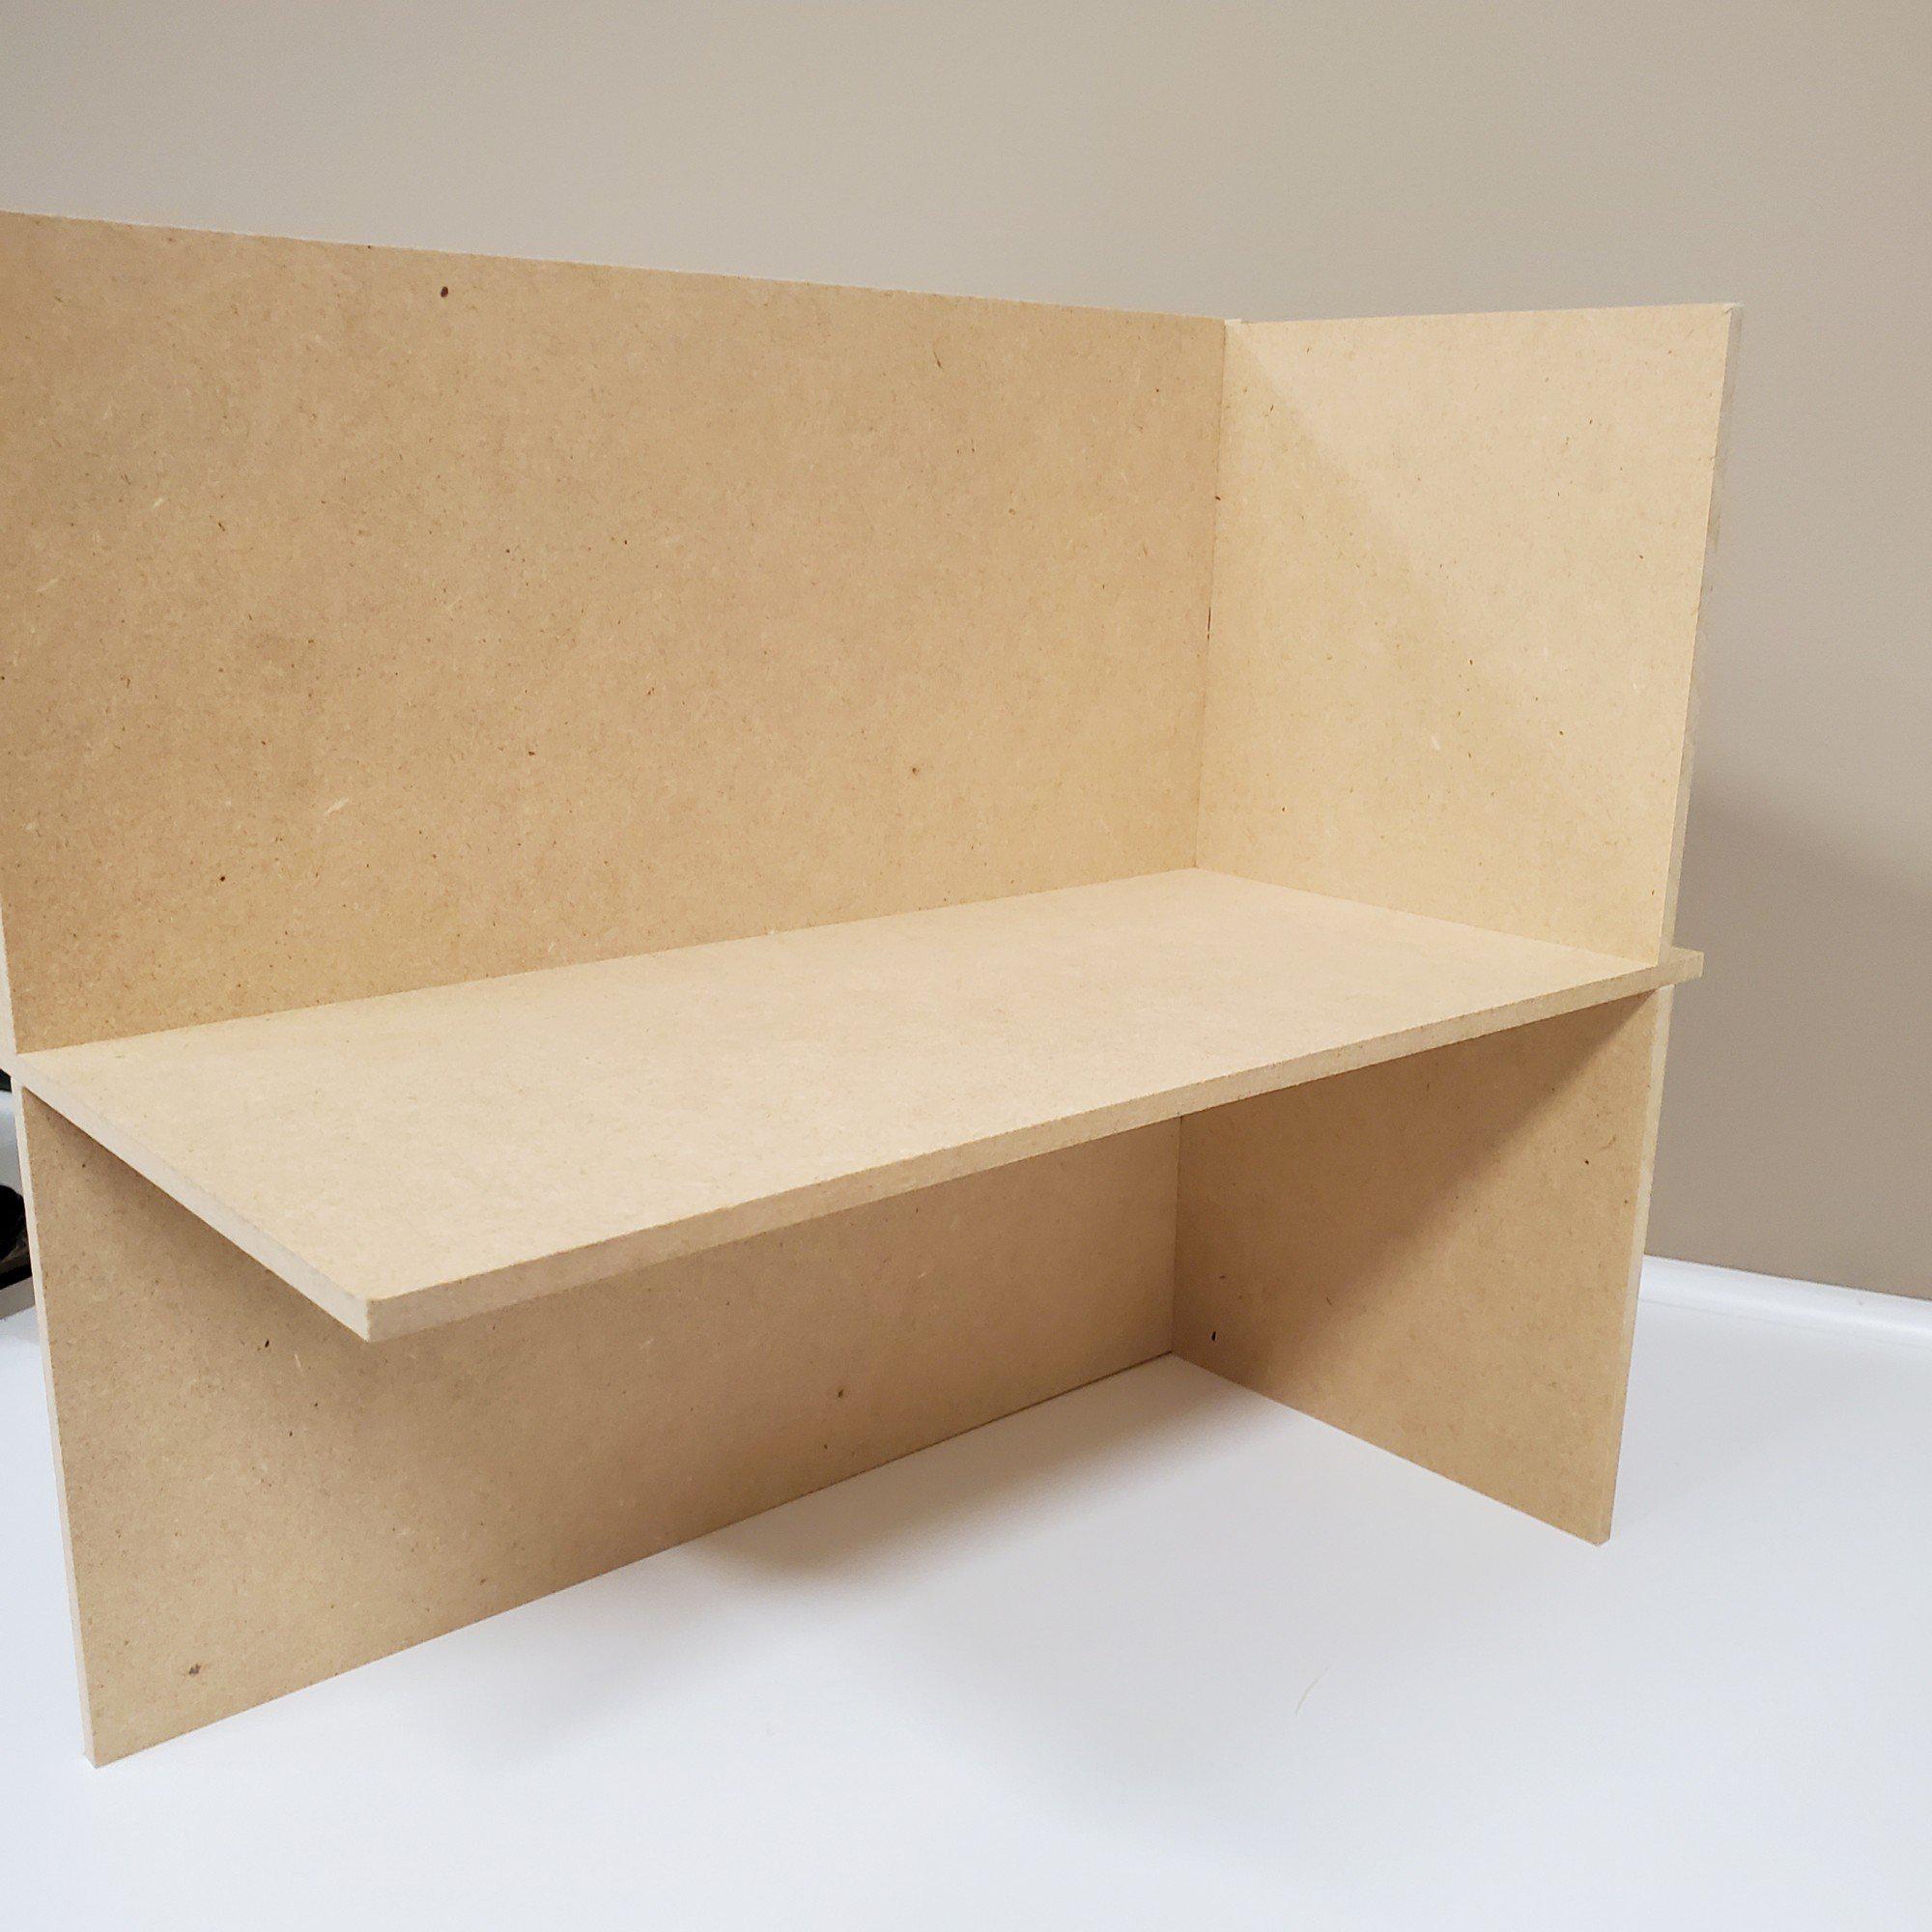 Side view of 4 Cubby Cube Insert for Cube Storage Shelves-The Steady Hand